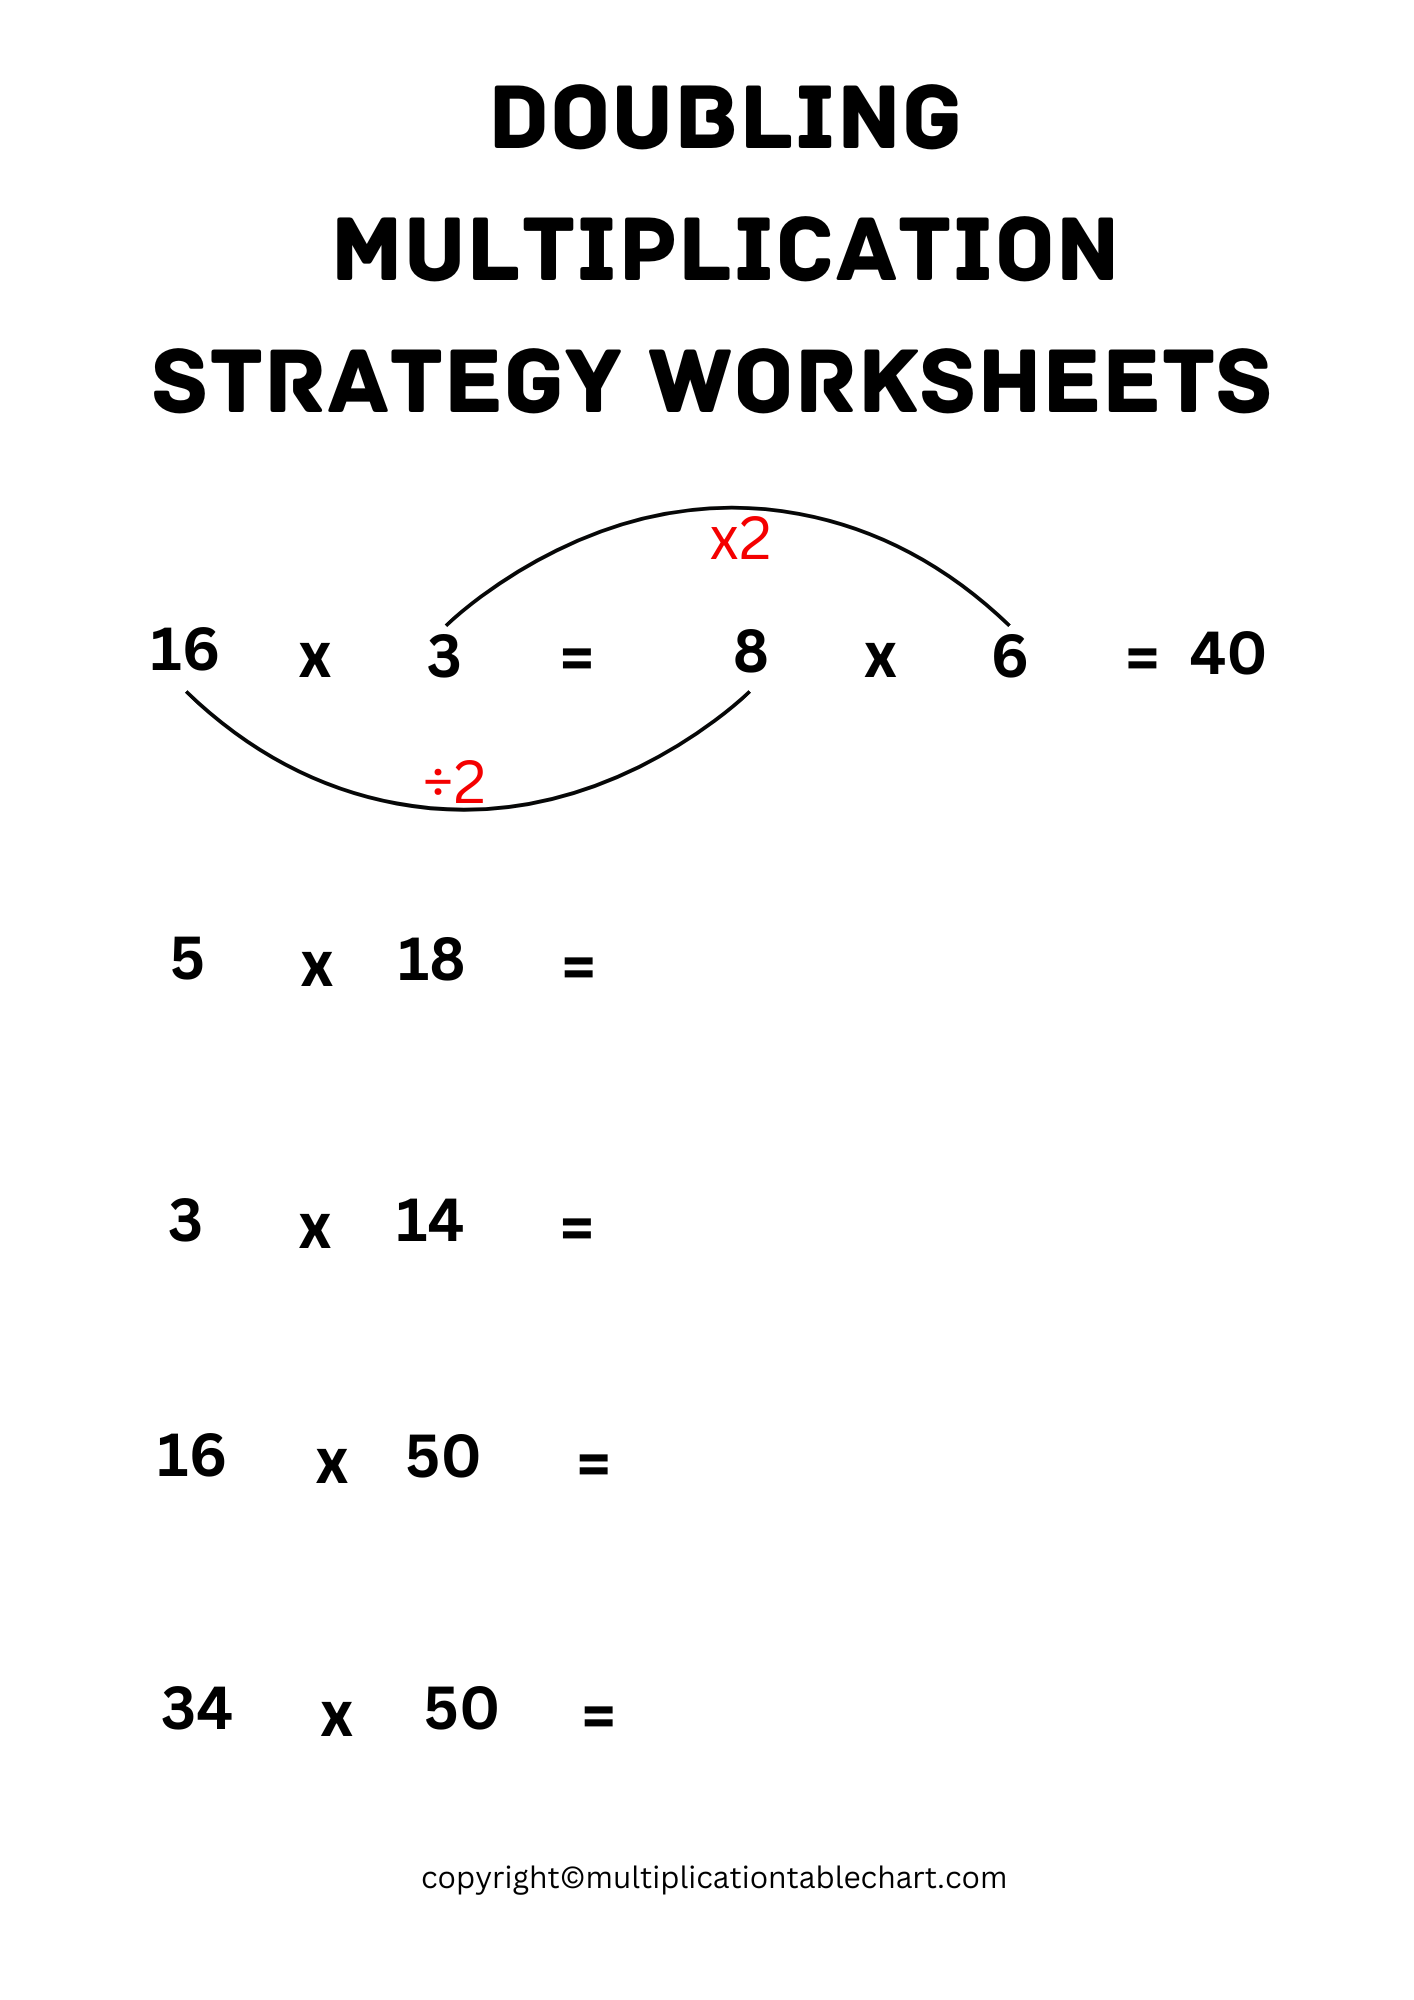 Doubling Multiplication Strategy Worksheets Printable PDF 